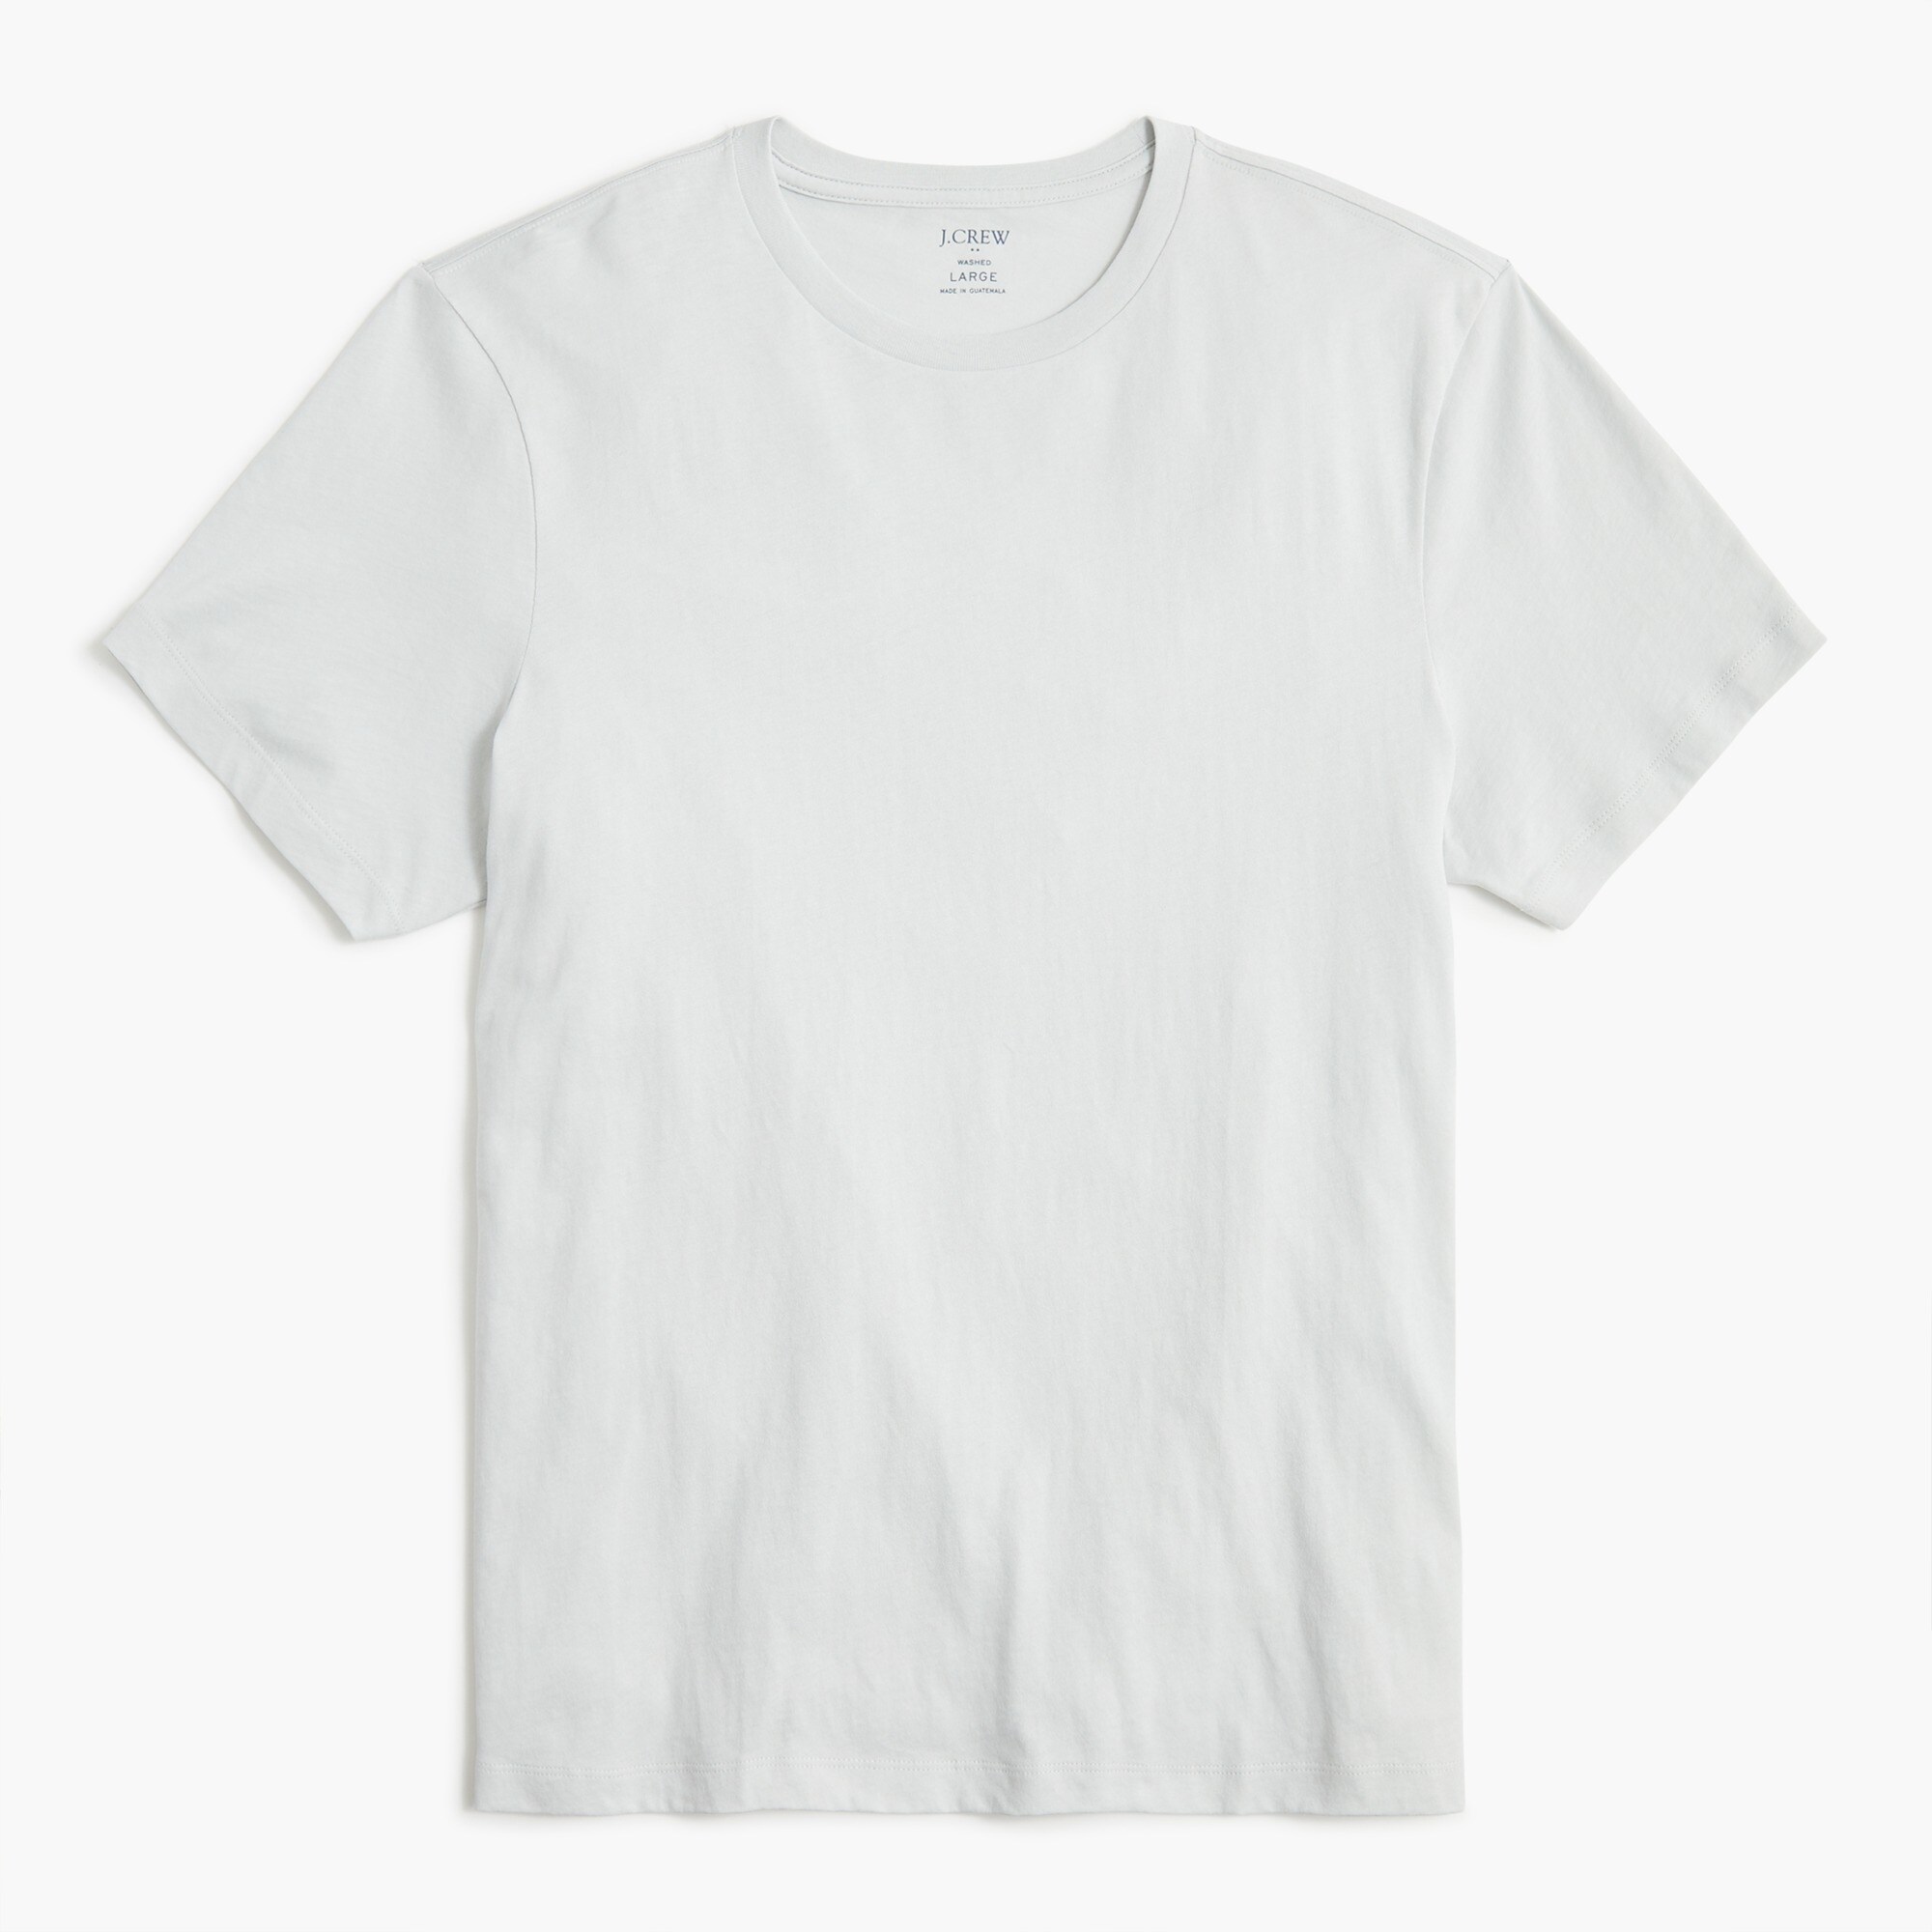  Cotton washed jersey tee